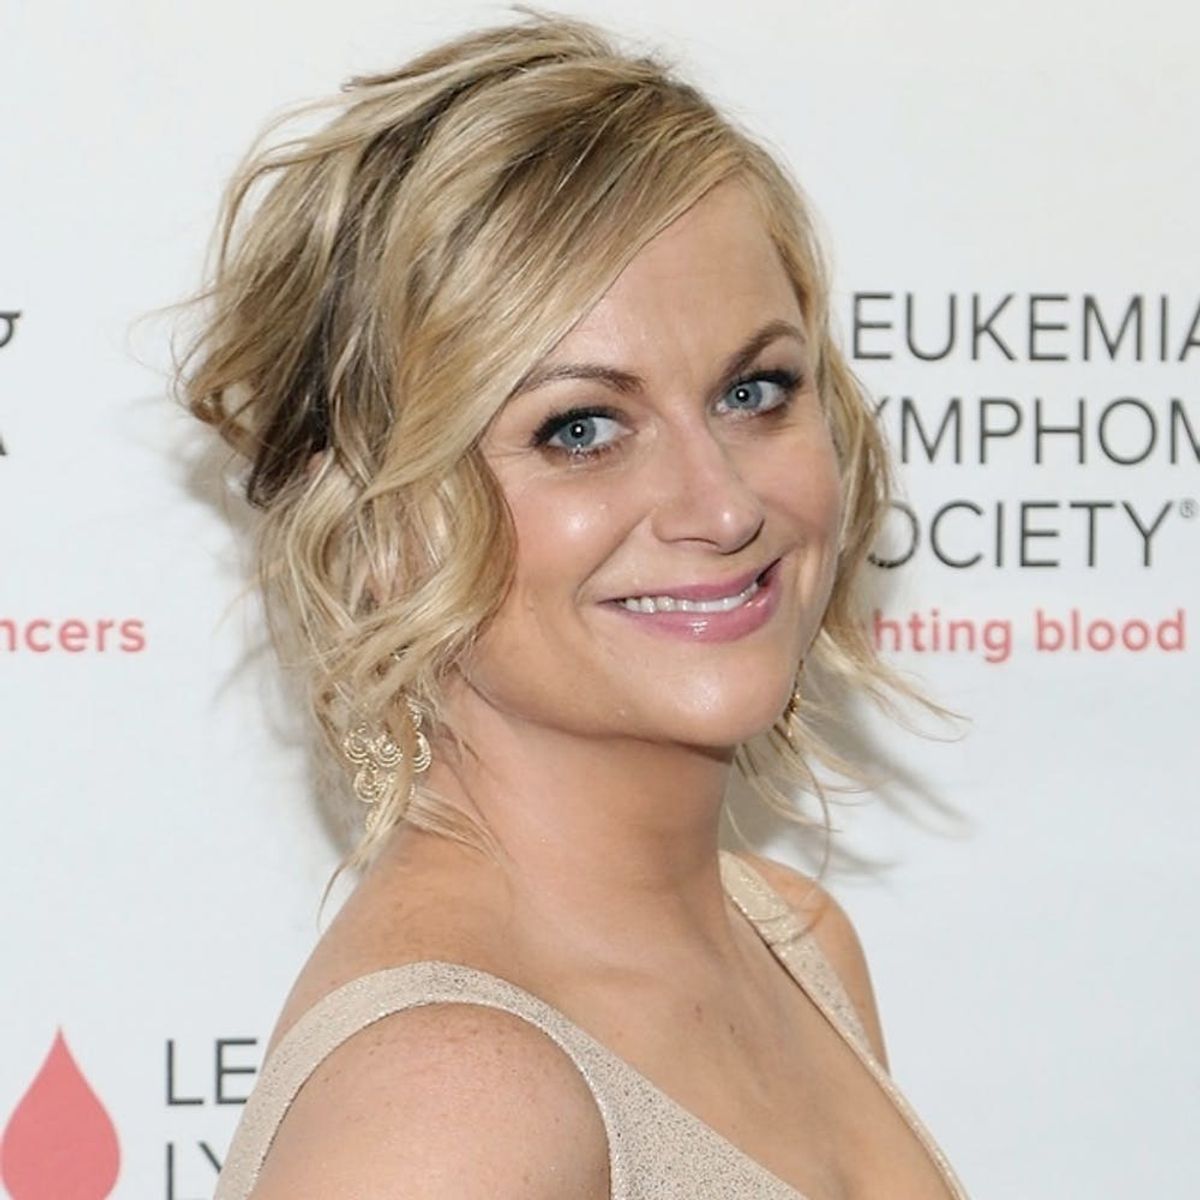 Amy Poehler’s Campaign for Girls Is Seriously Inspiring